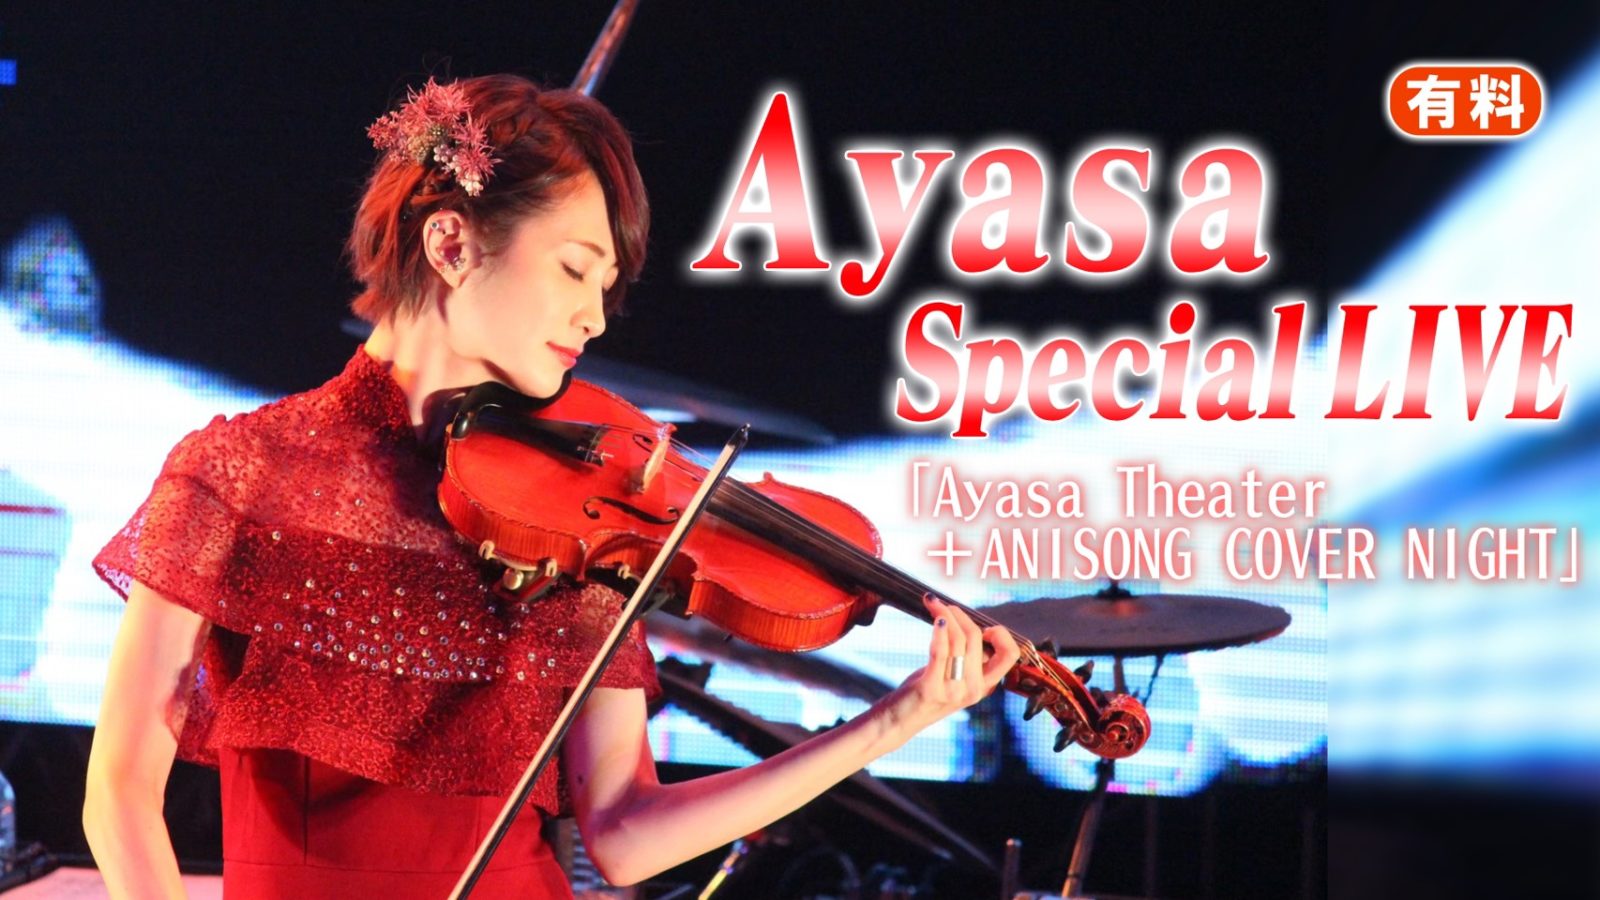 Violinist Ayasa, First-ever Paid Live Concert Broadcast with her Band to Broadcast on Nico Live & Bilibili on September 13!!サムネイル画像!